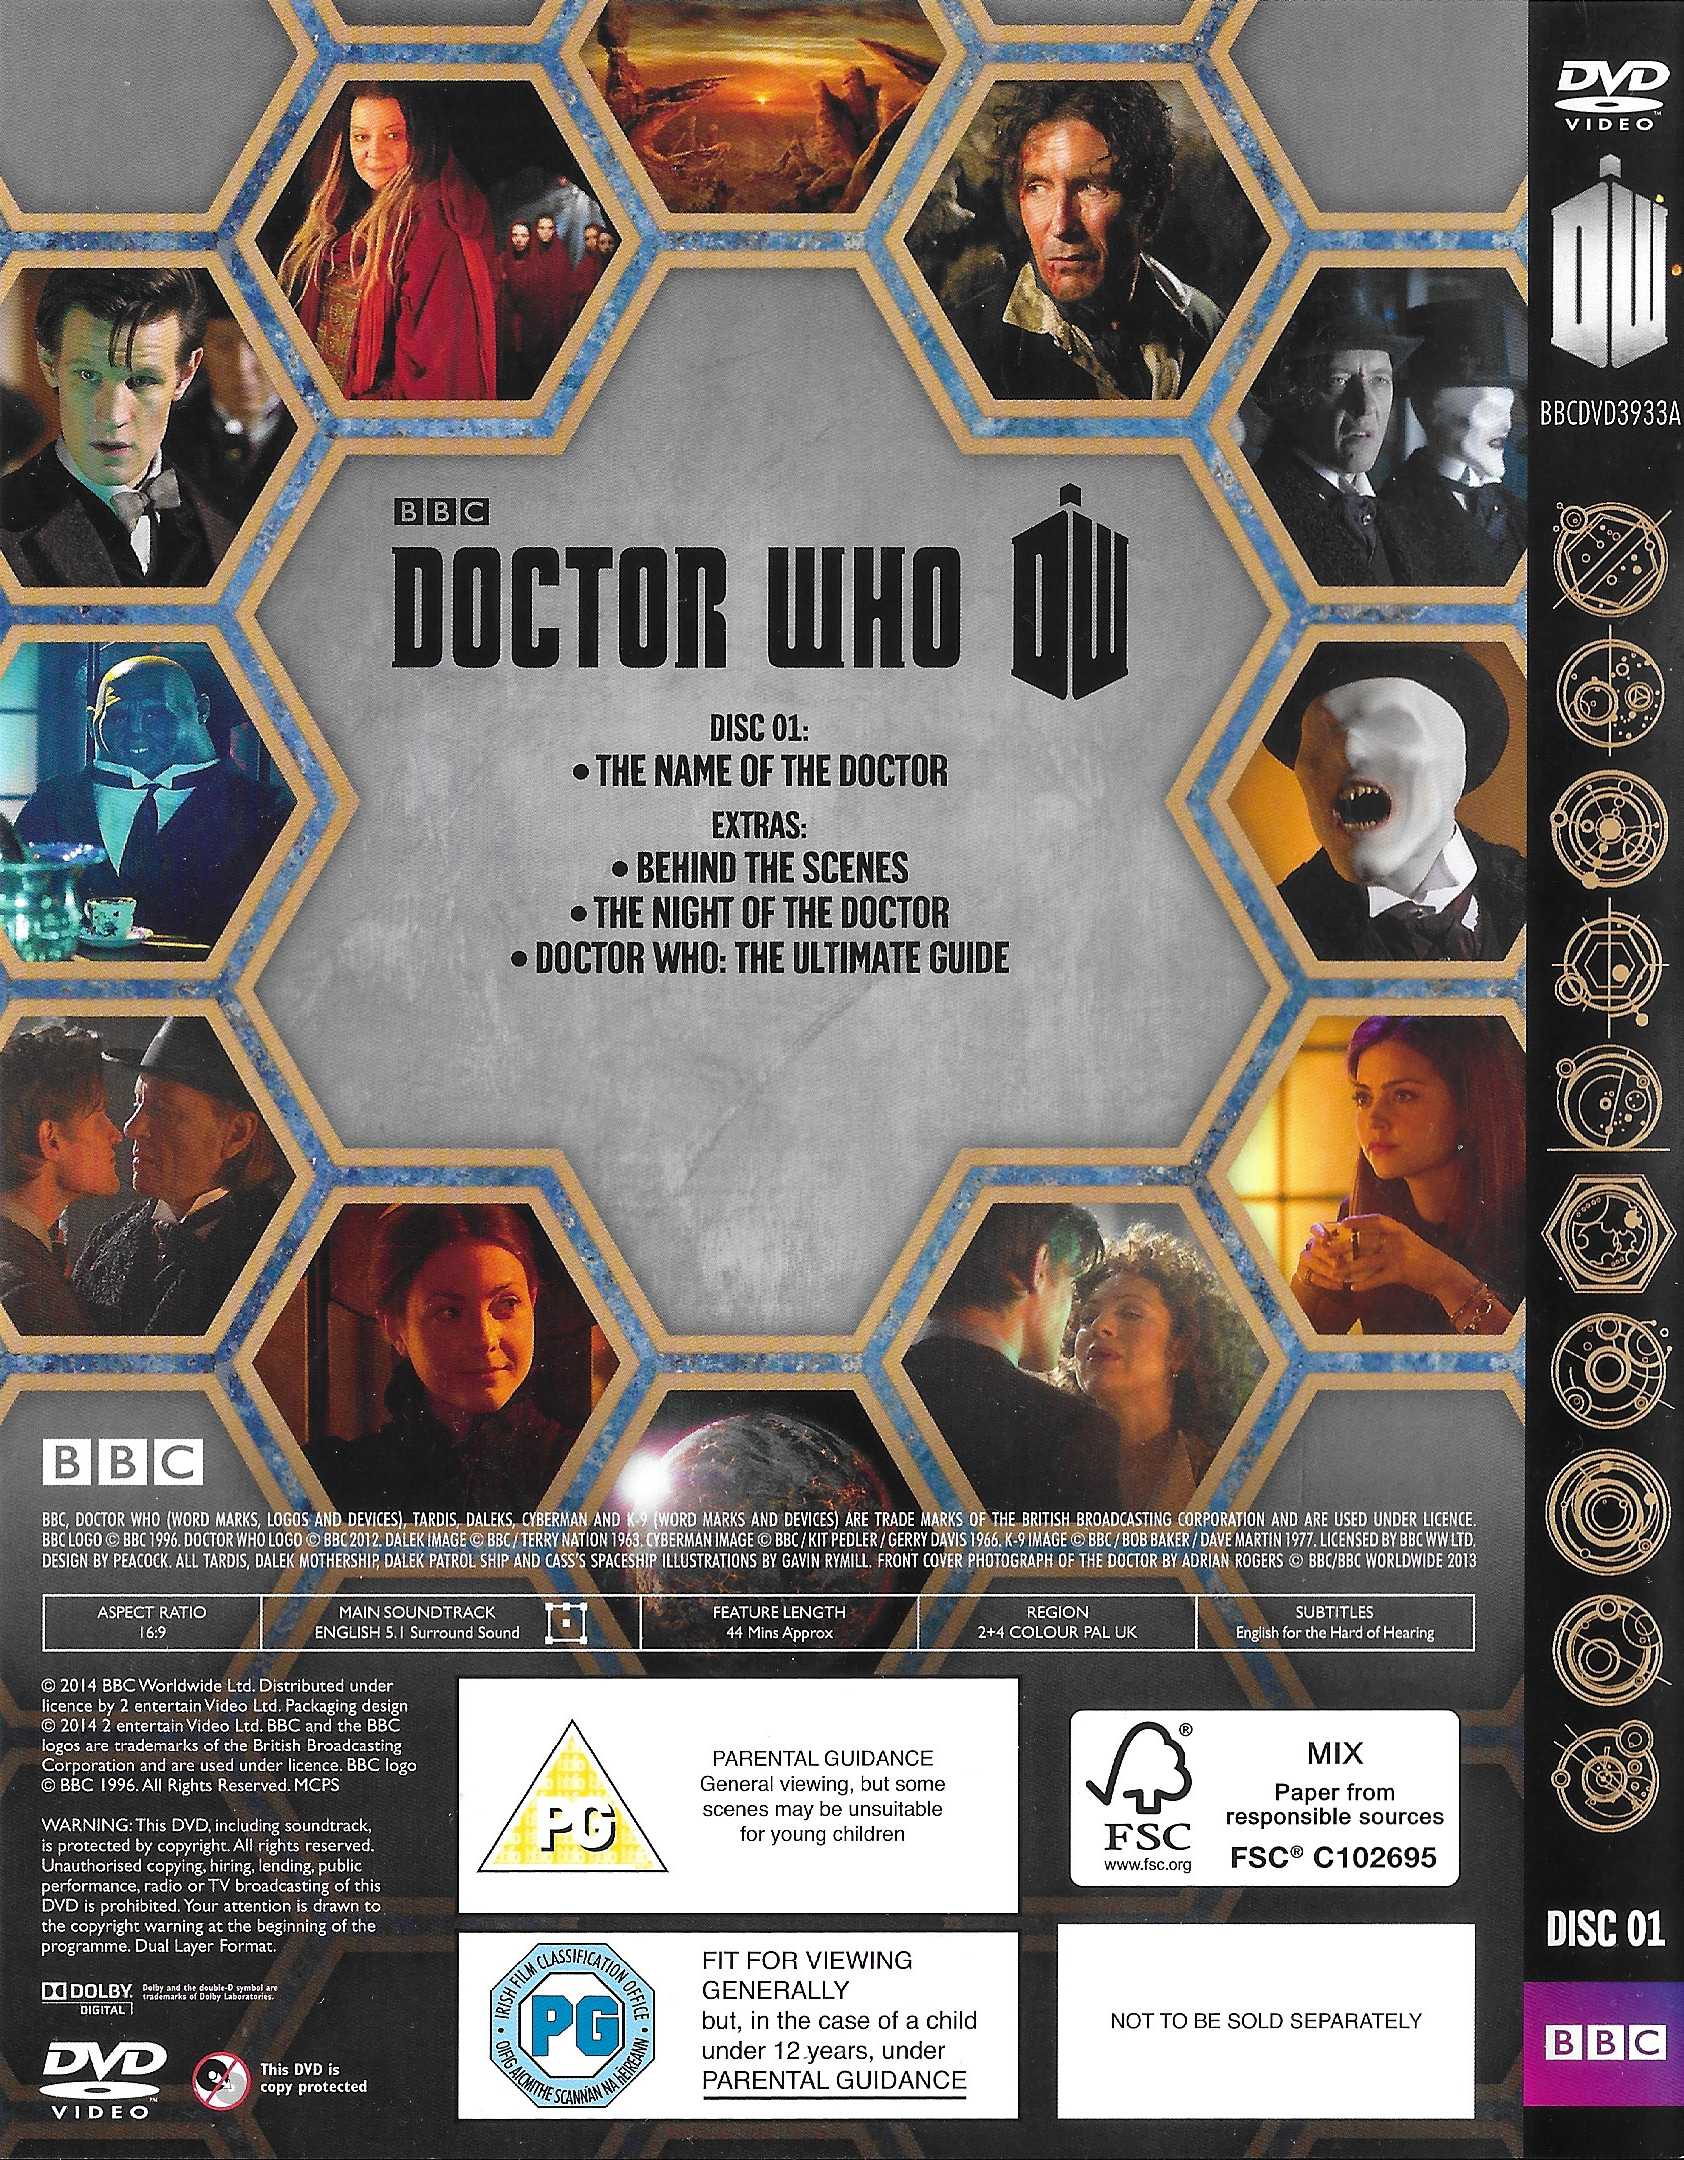 Picture of BBCDVD 3933 01 Doctor Who - The name of the Doctor by artist Steven Moffat from the BBC records and Tapes library